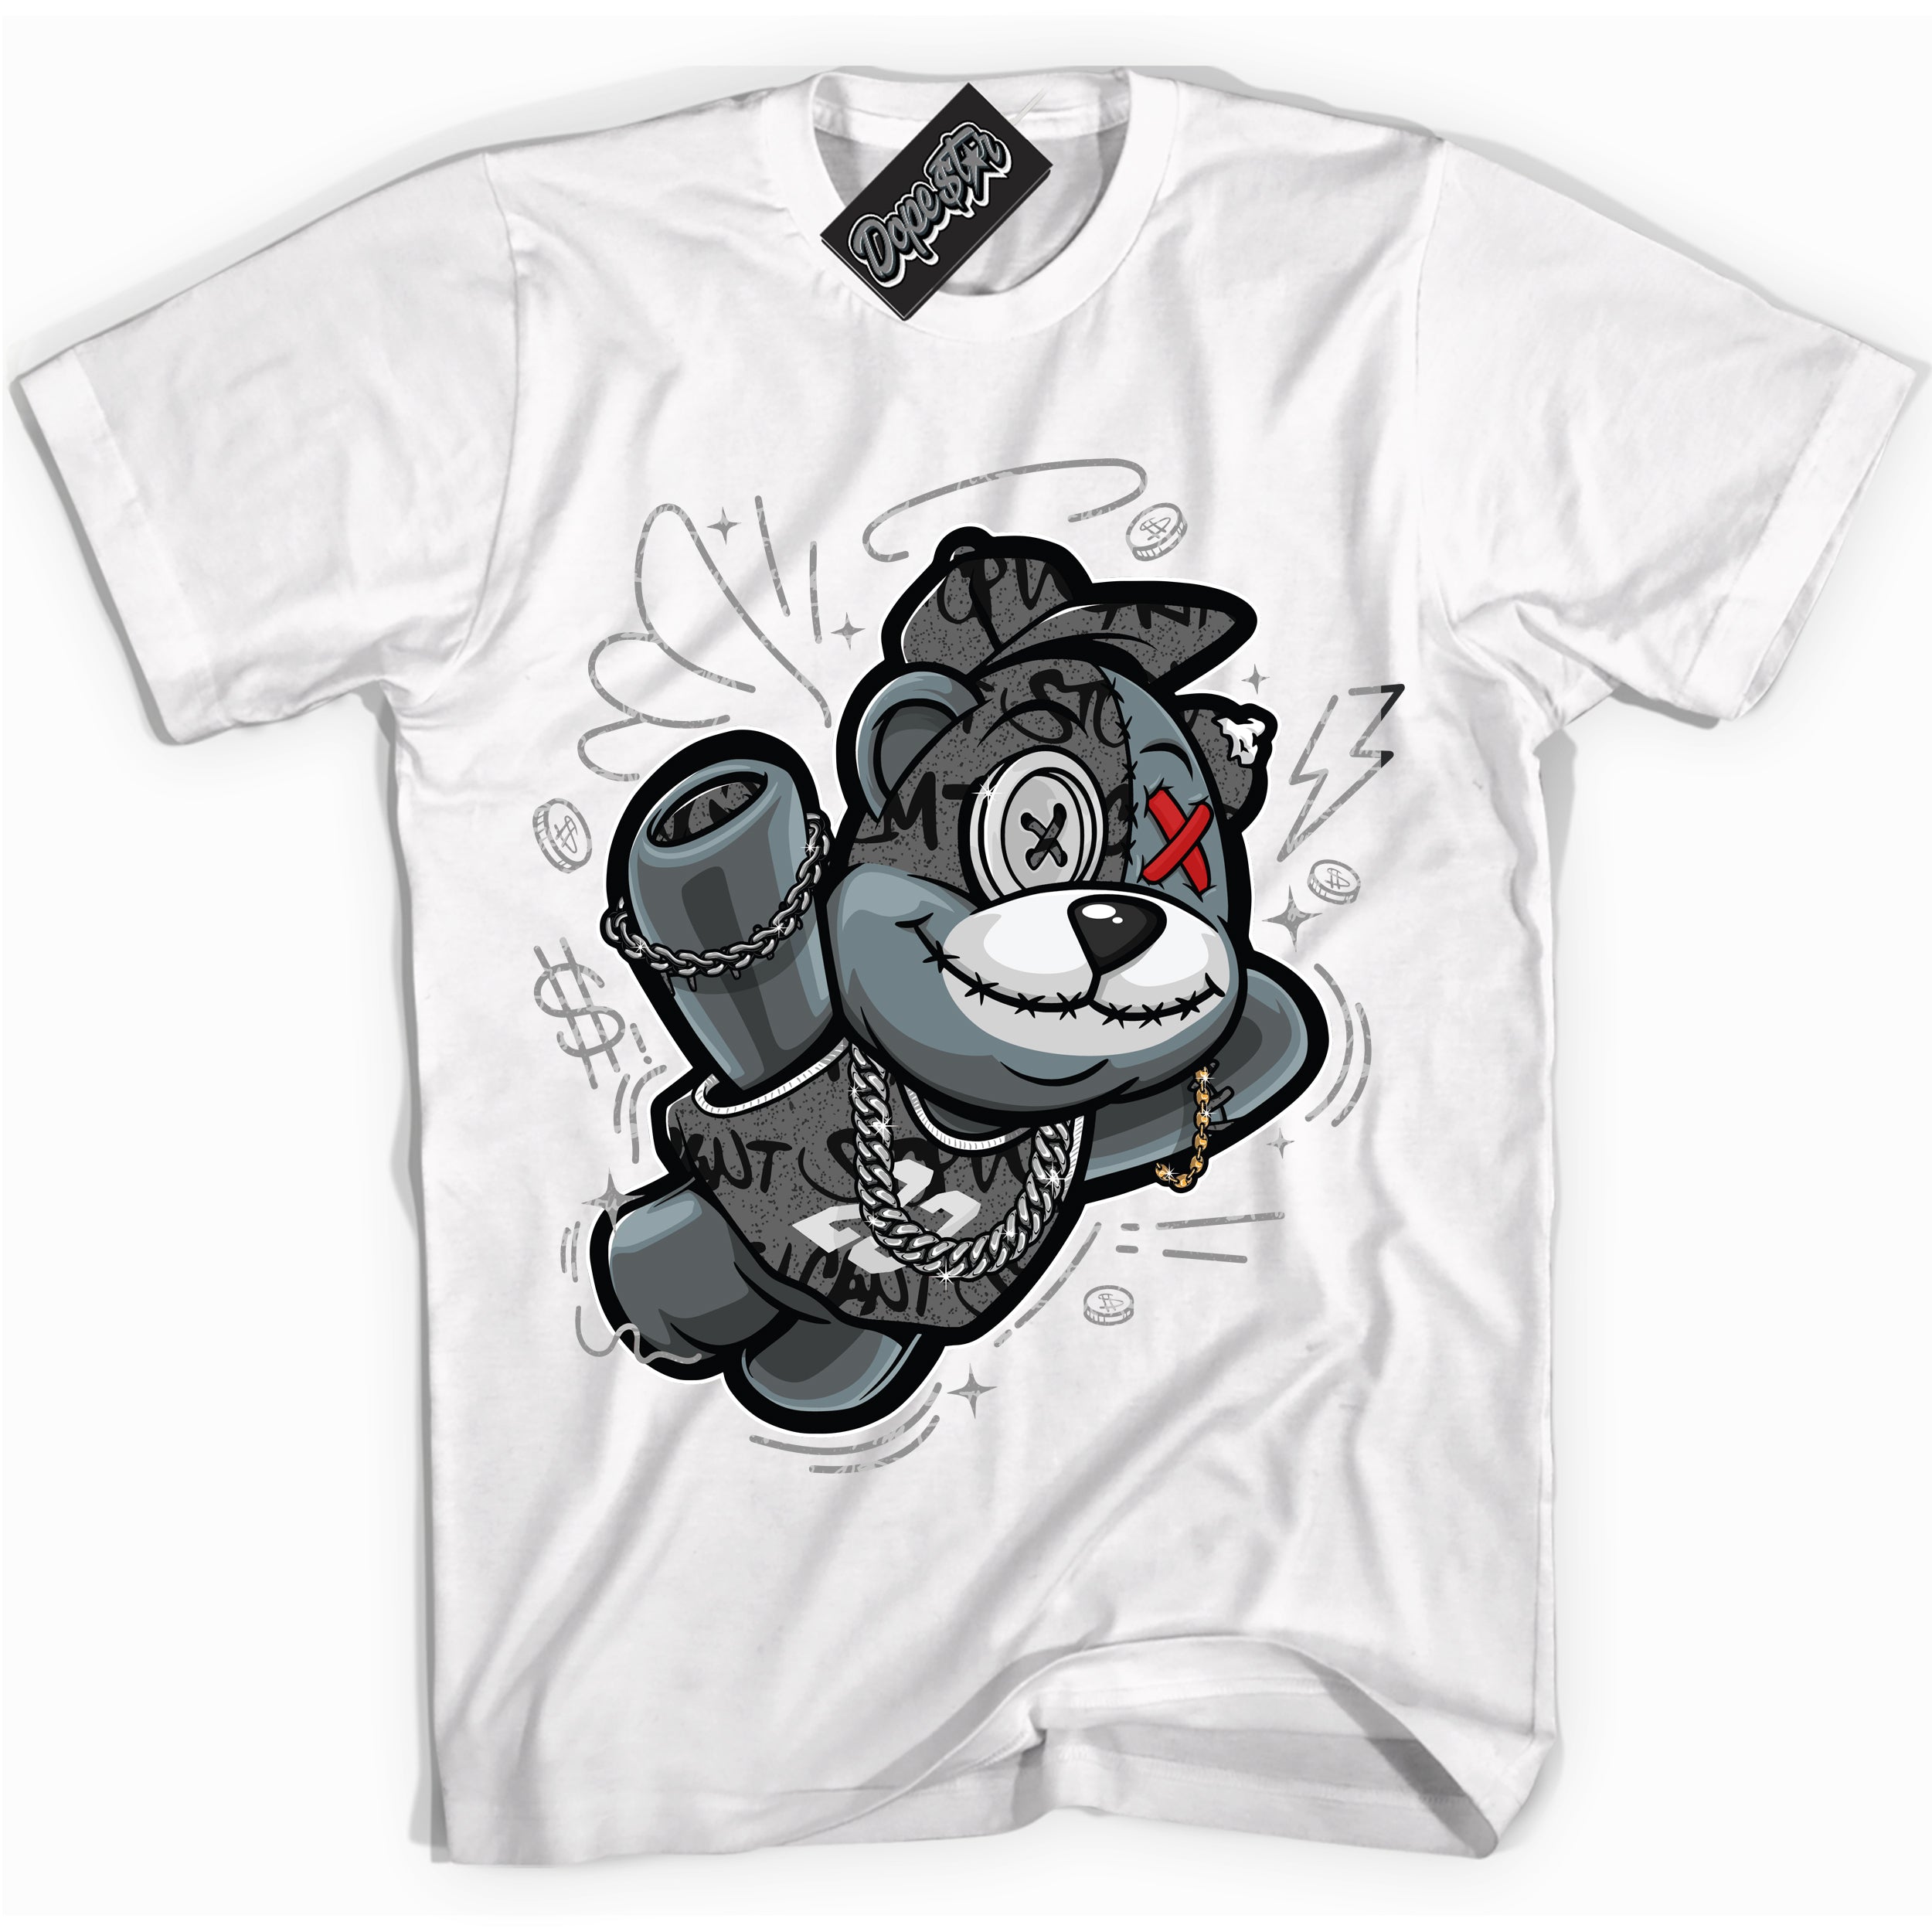 Cool White Shirt with “ Slam Dunk Bear ” design that perfectly matches Rebellionaire 1s Sneakers.